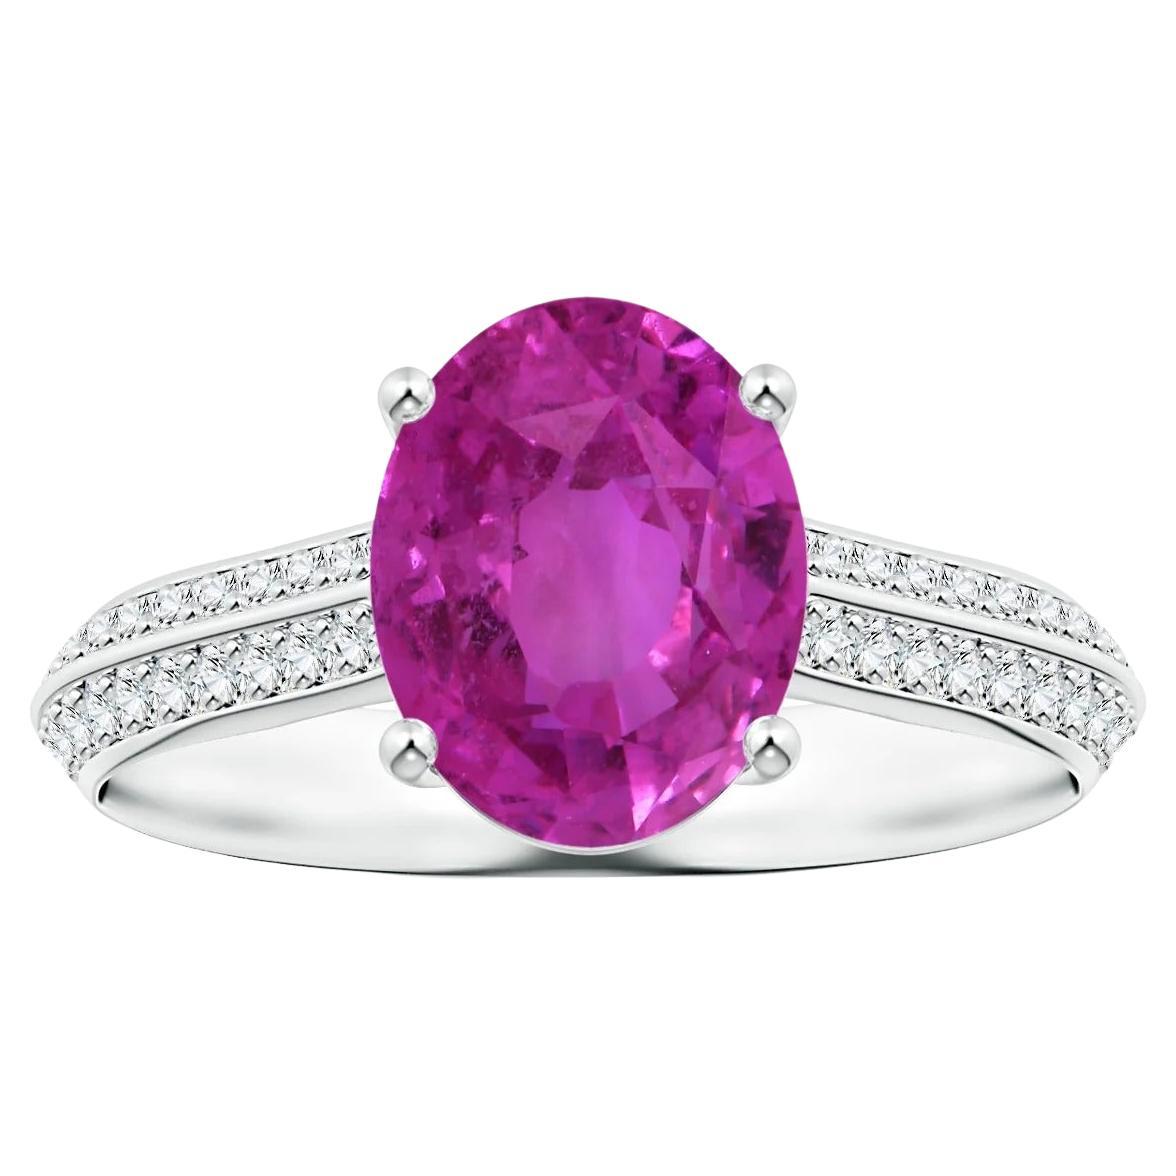 For Sale:  GIA Certified Pink Sapphire Knife Edge Ring in White Gold with Diamonds